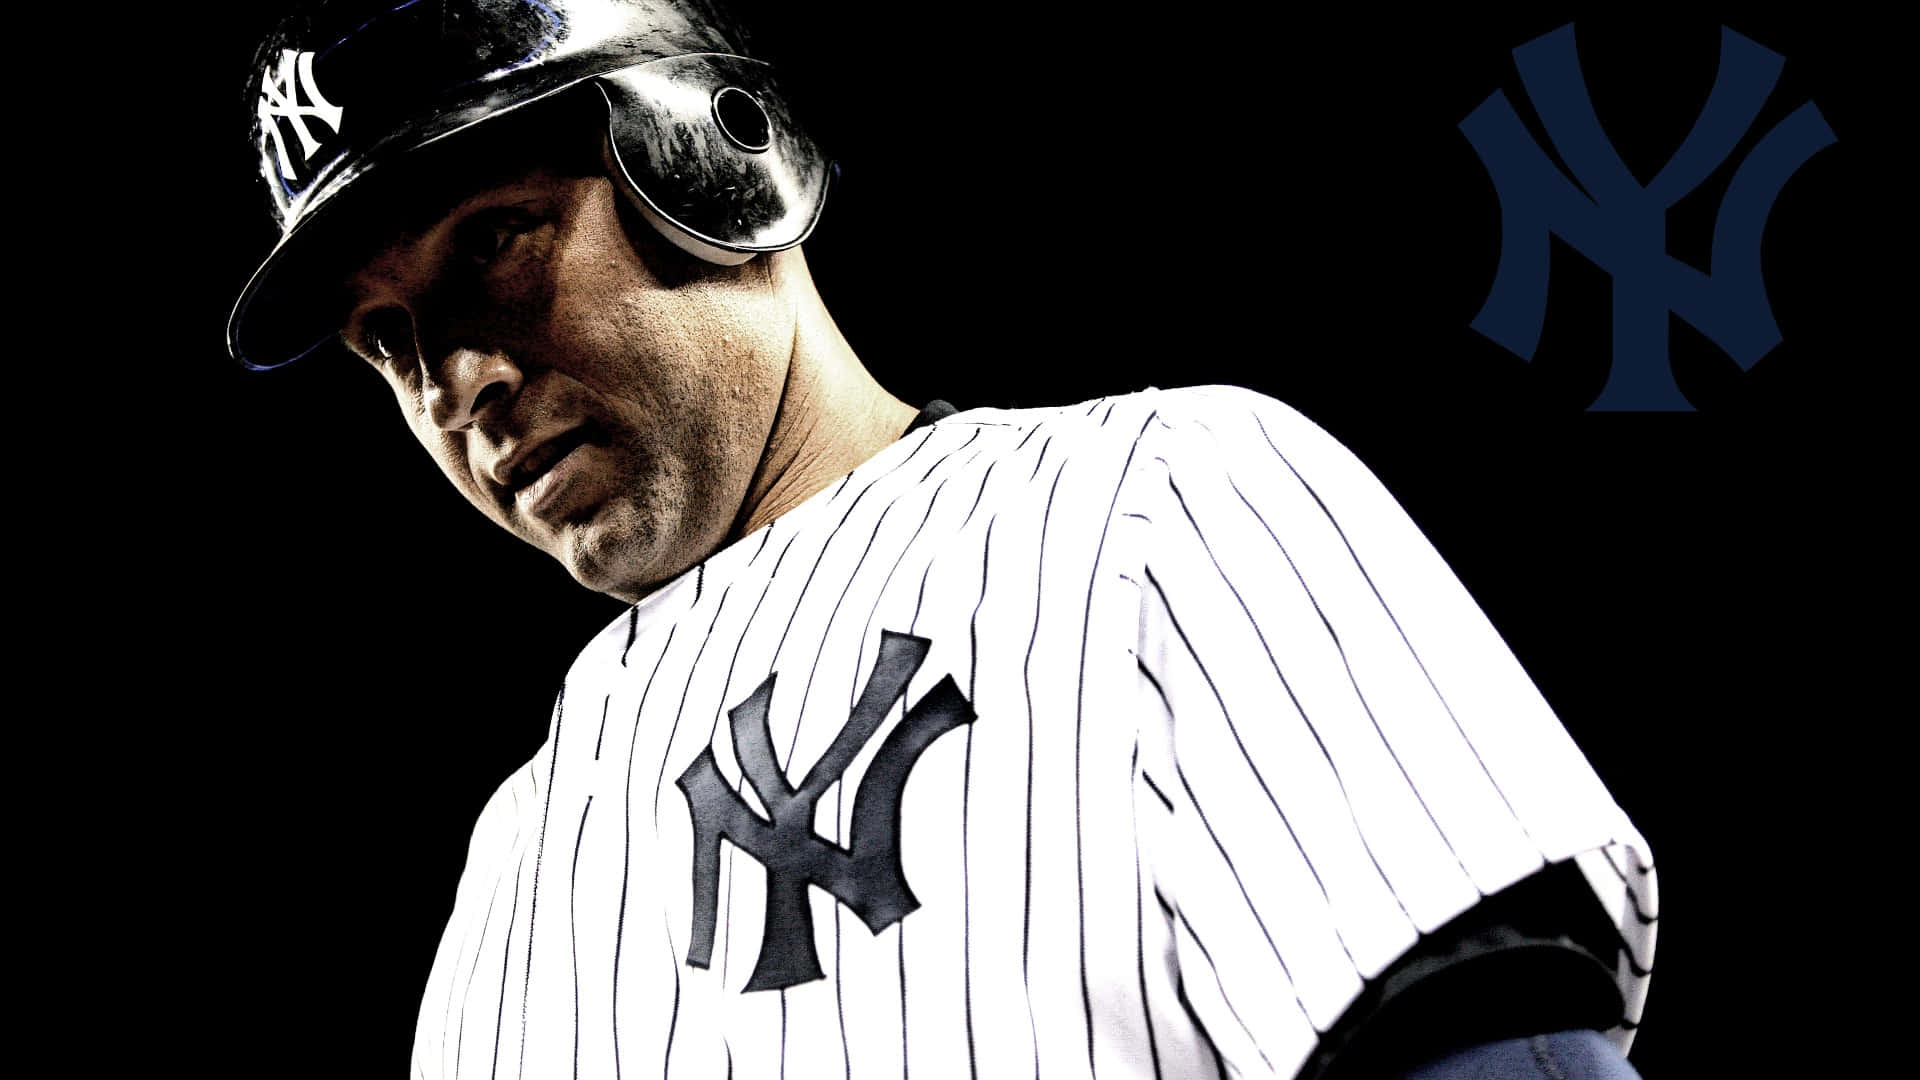 The Yankees pull off a great victory! Wallpaper